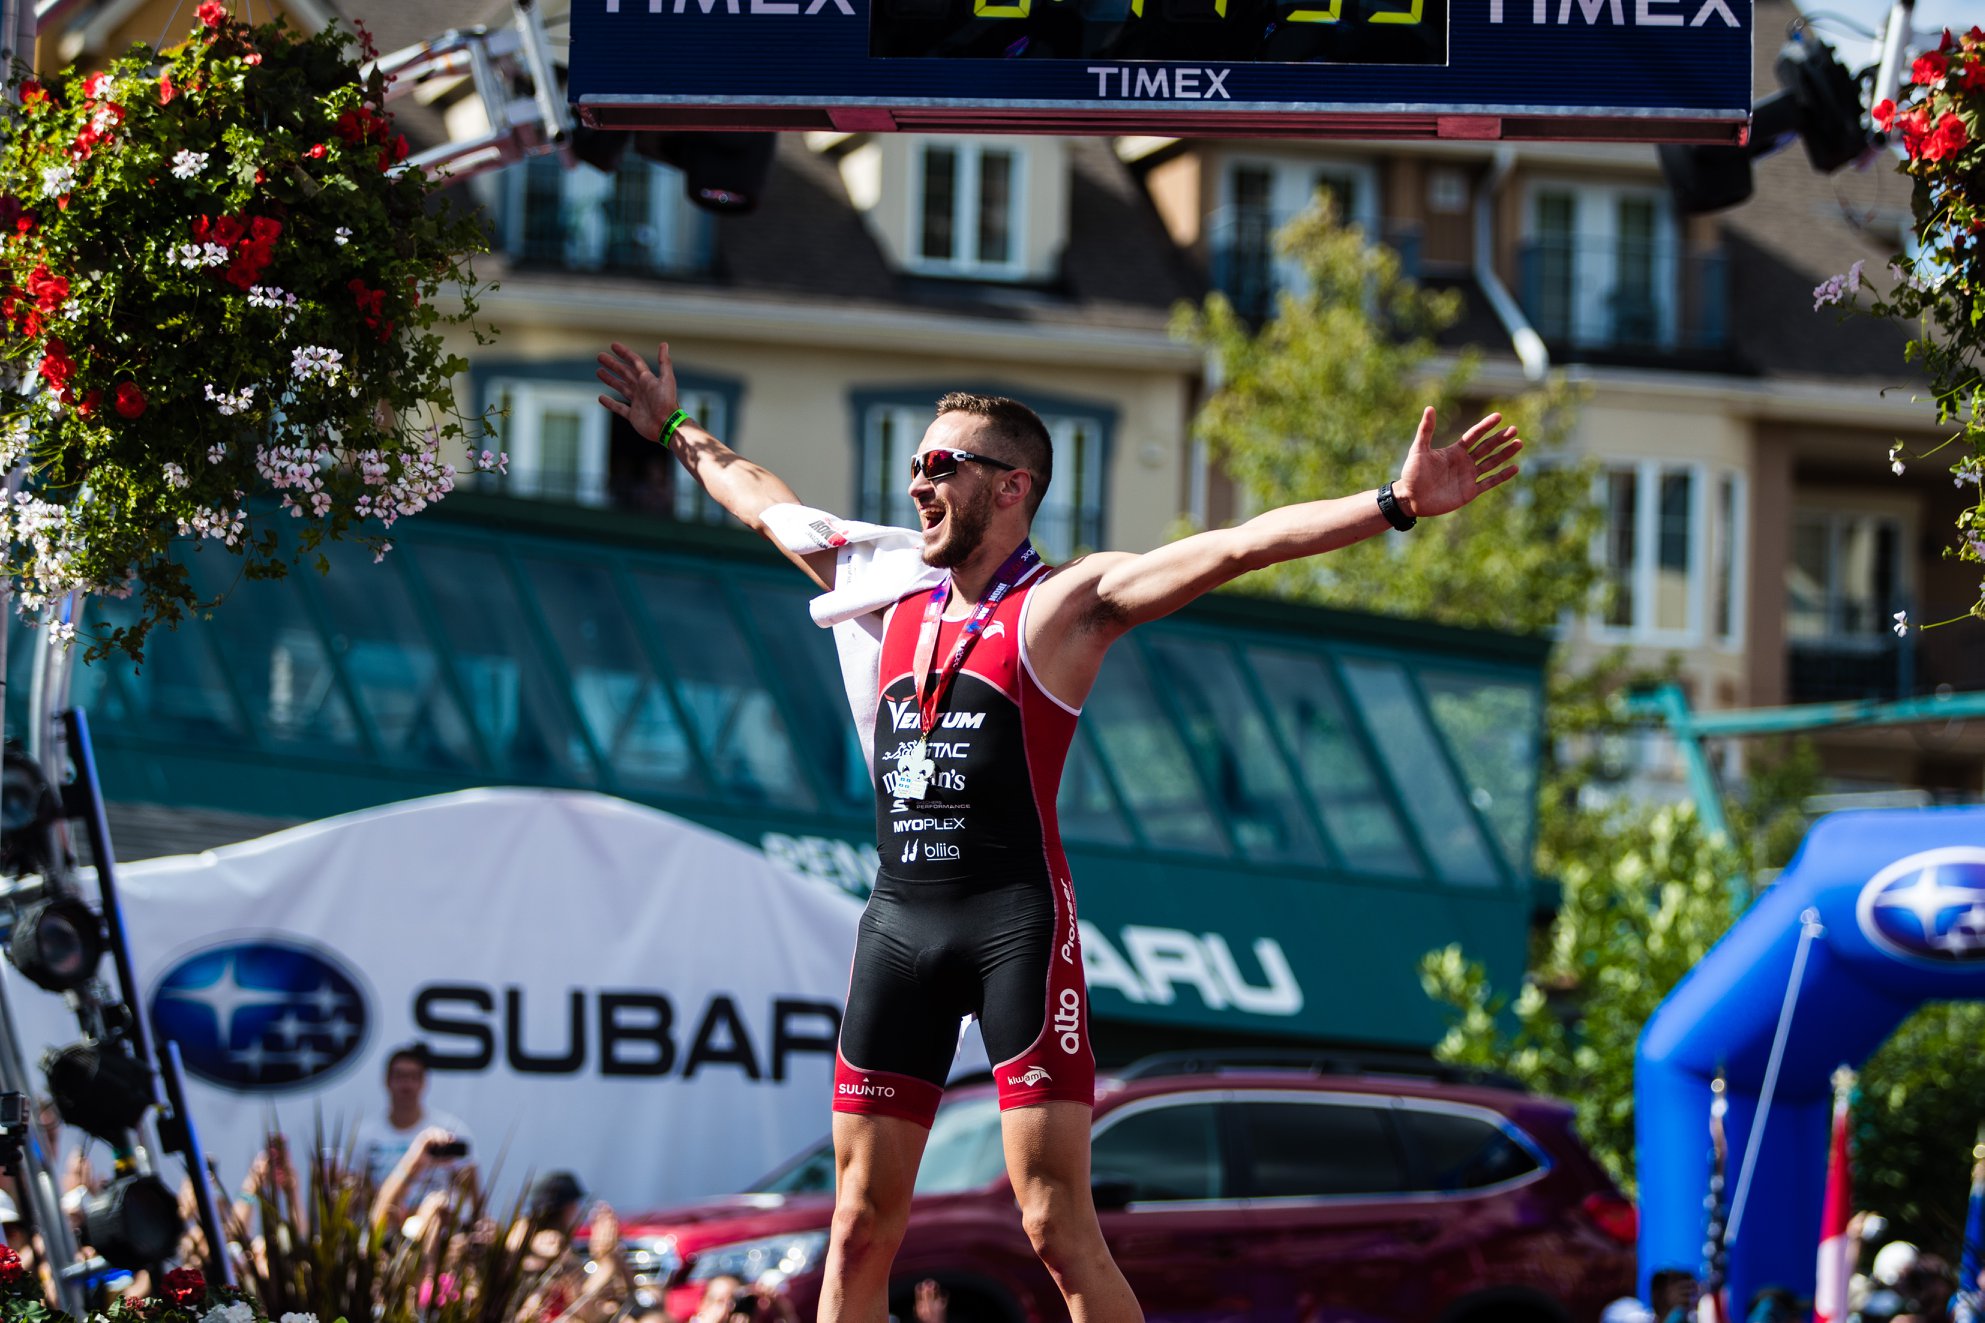 Coach_Terry_Wilson_Pursuit_of_The_Perfect_Race_IRONMAN_Mont_Tremblant_Cody_Beals_Finish.jpg